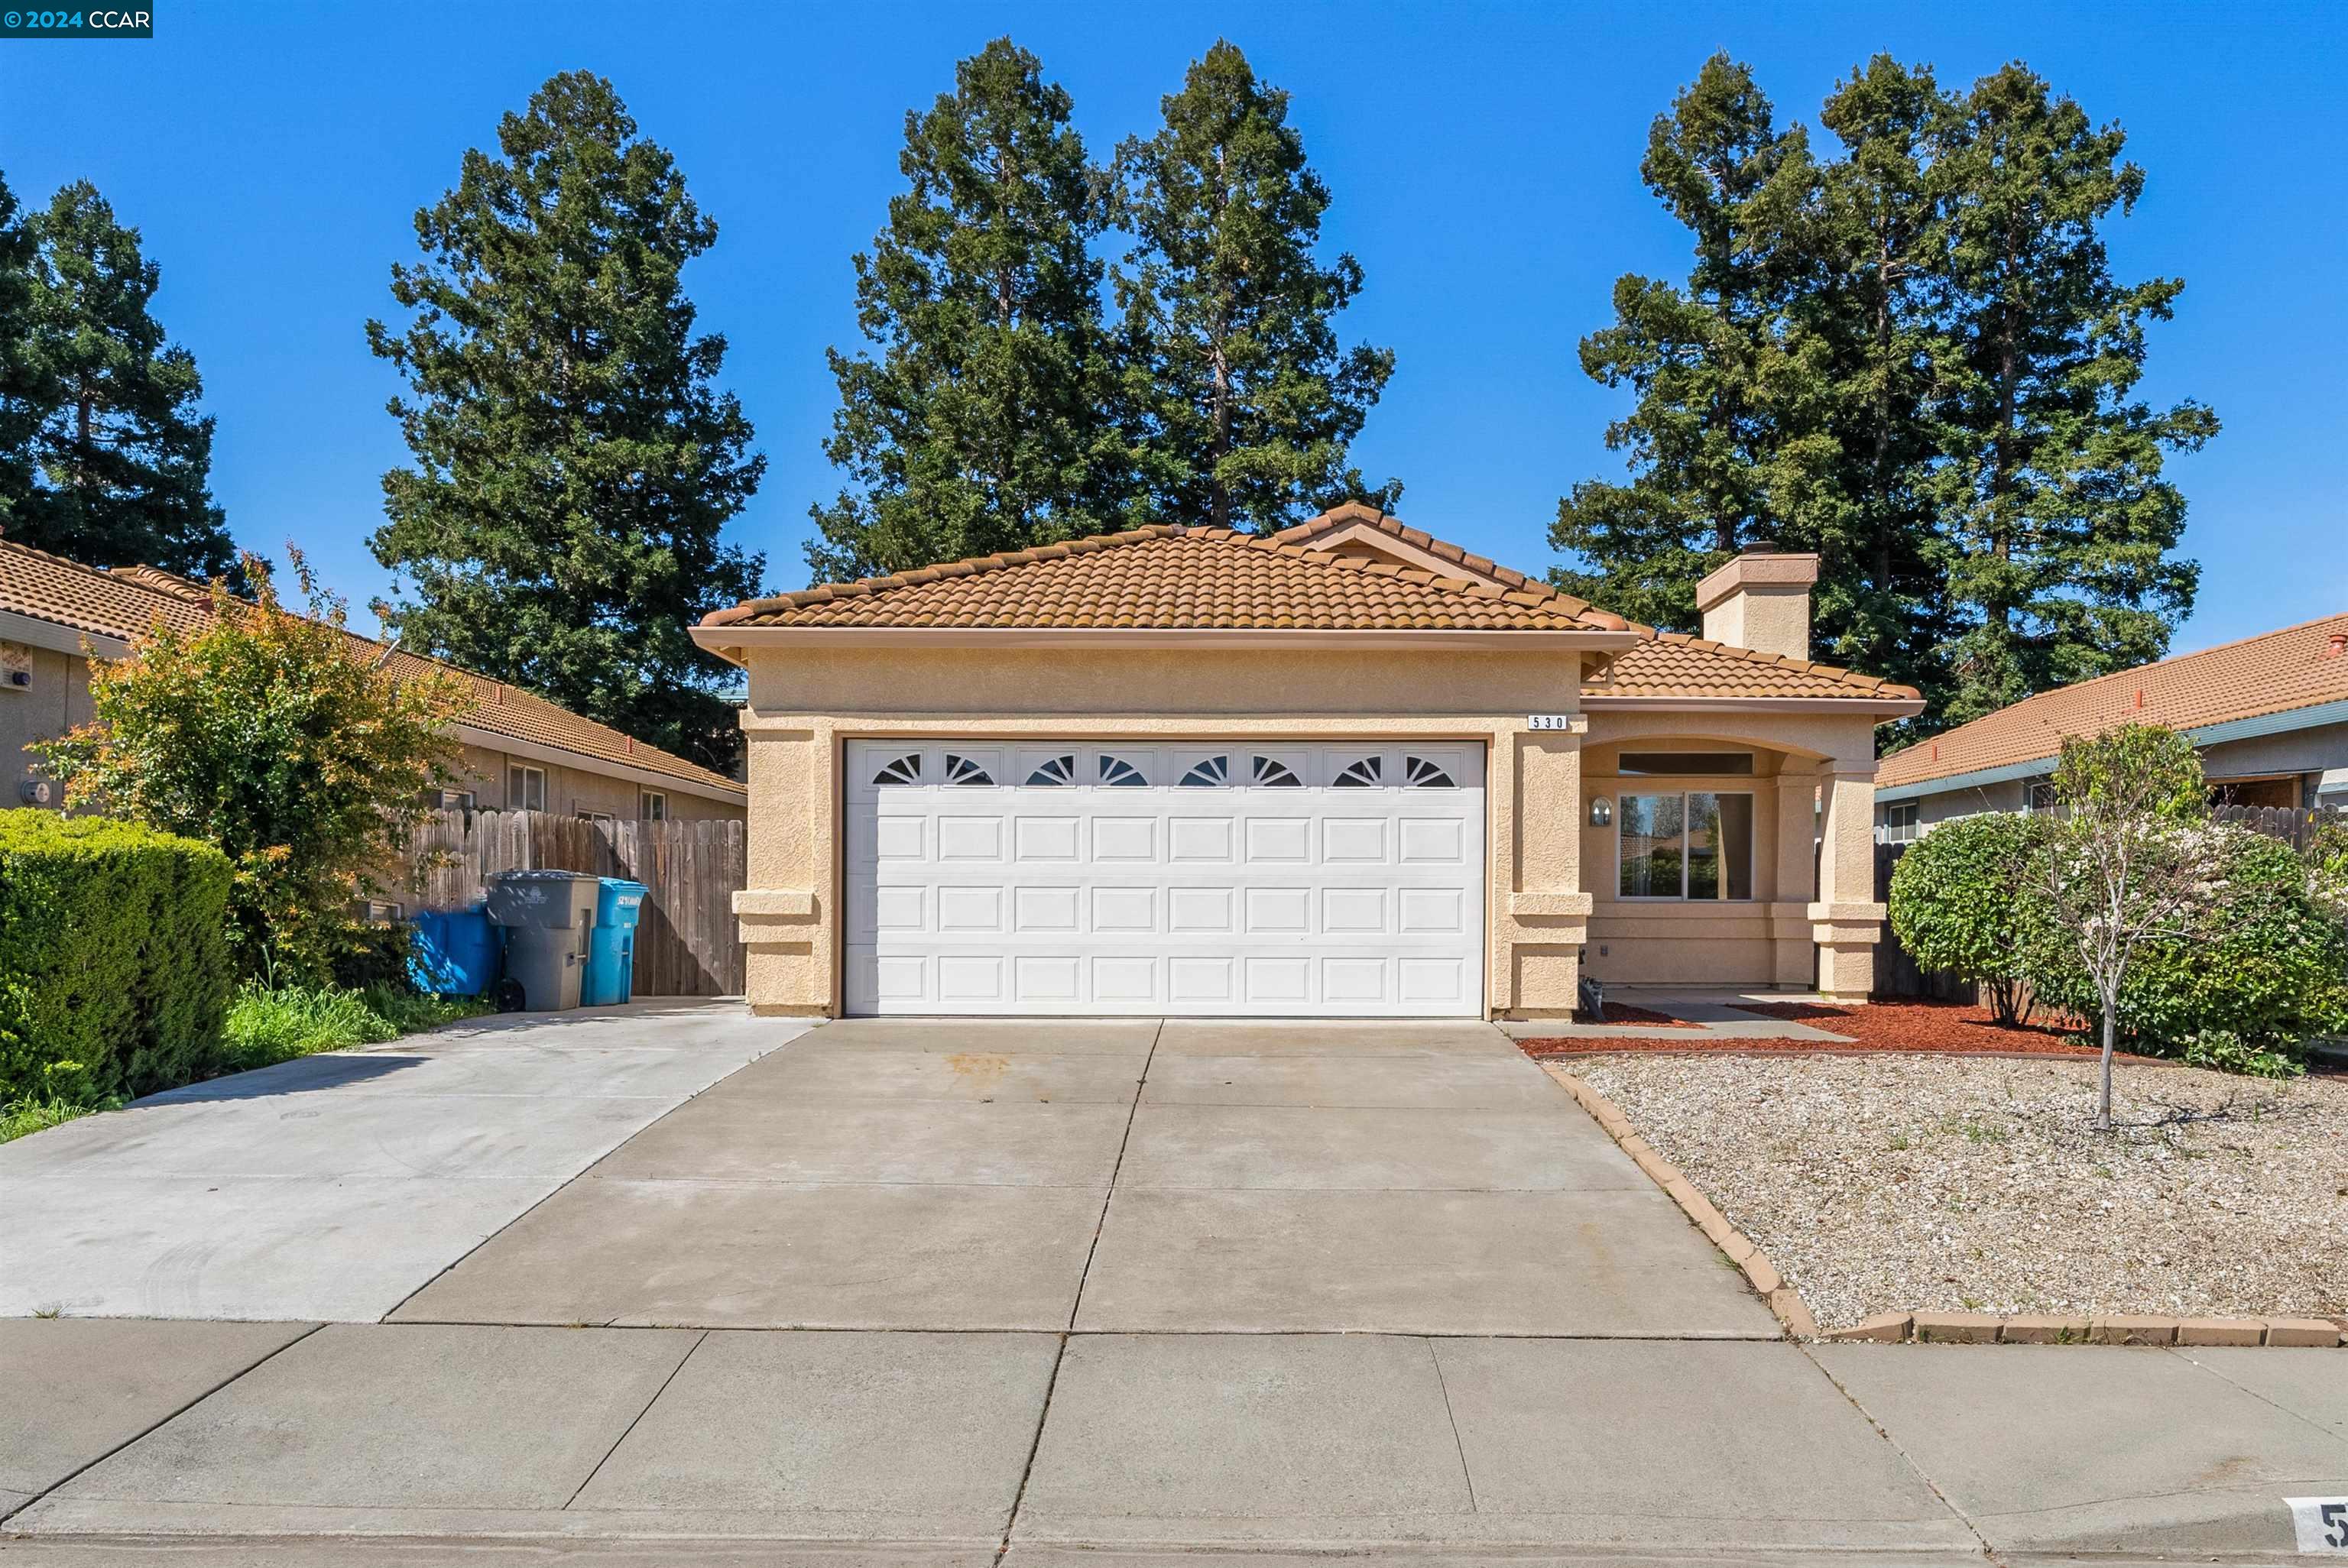 530 Canvasback Ct, Vacaville, CA 95687